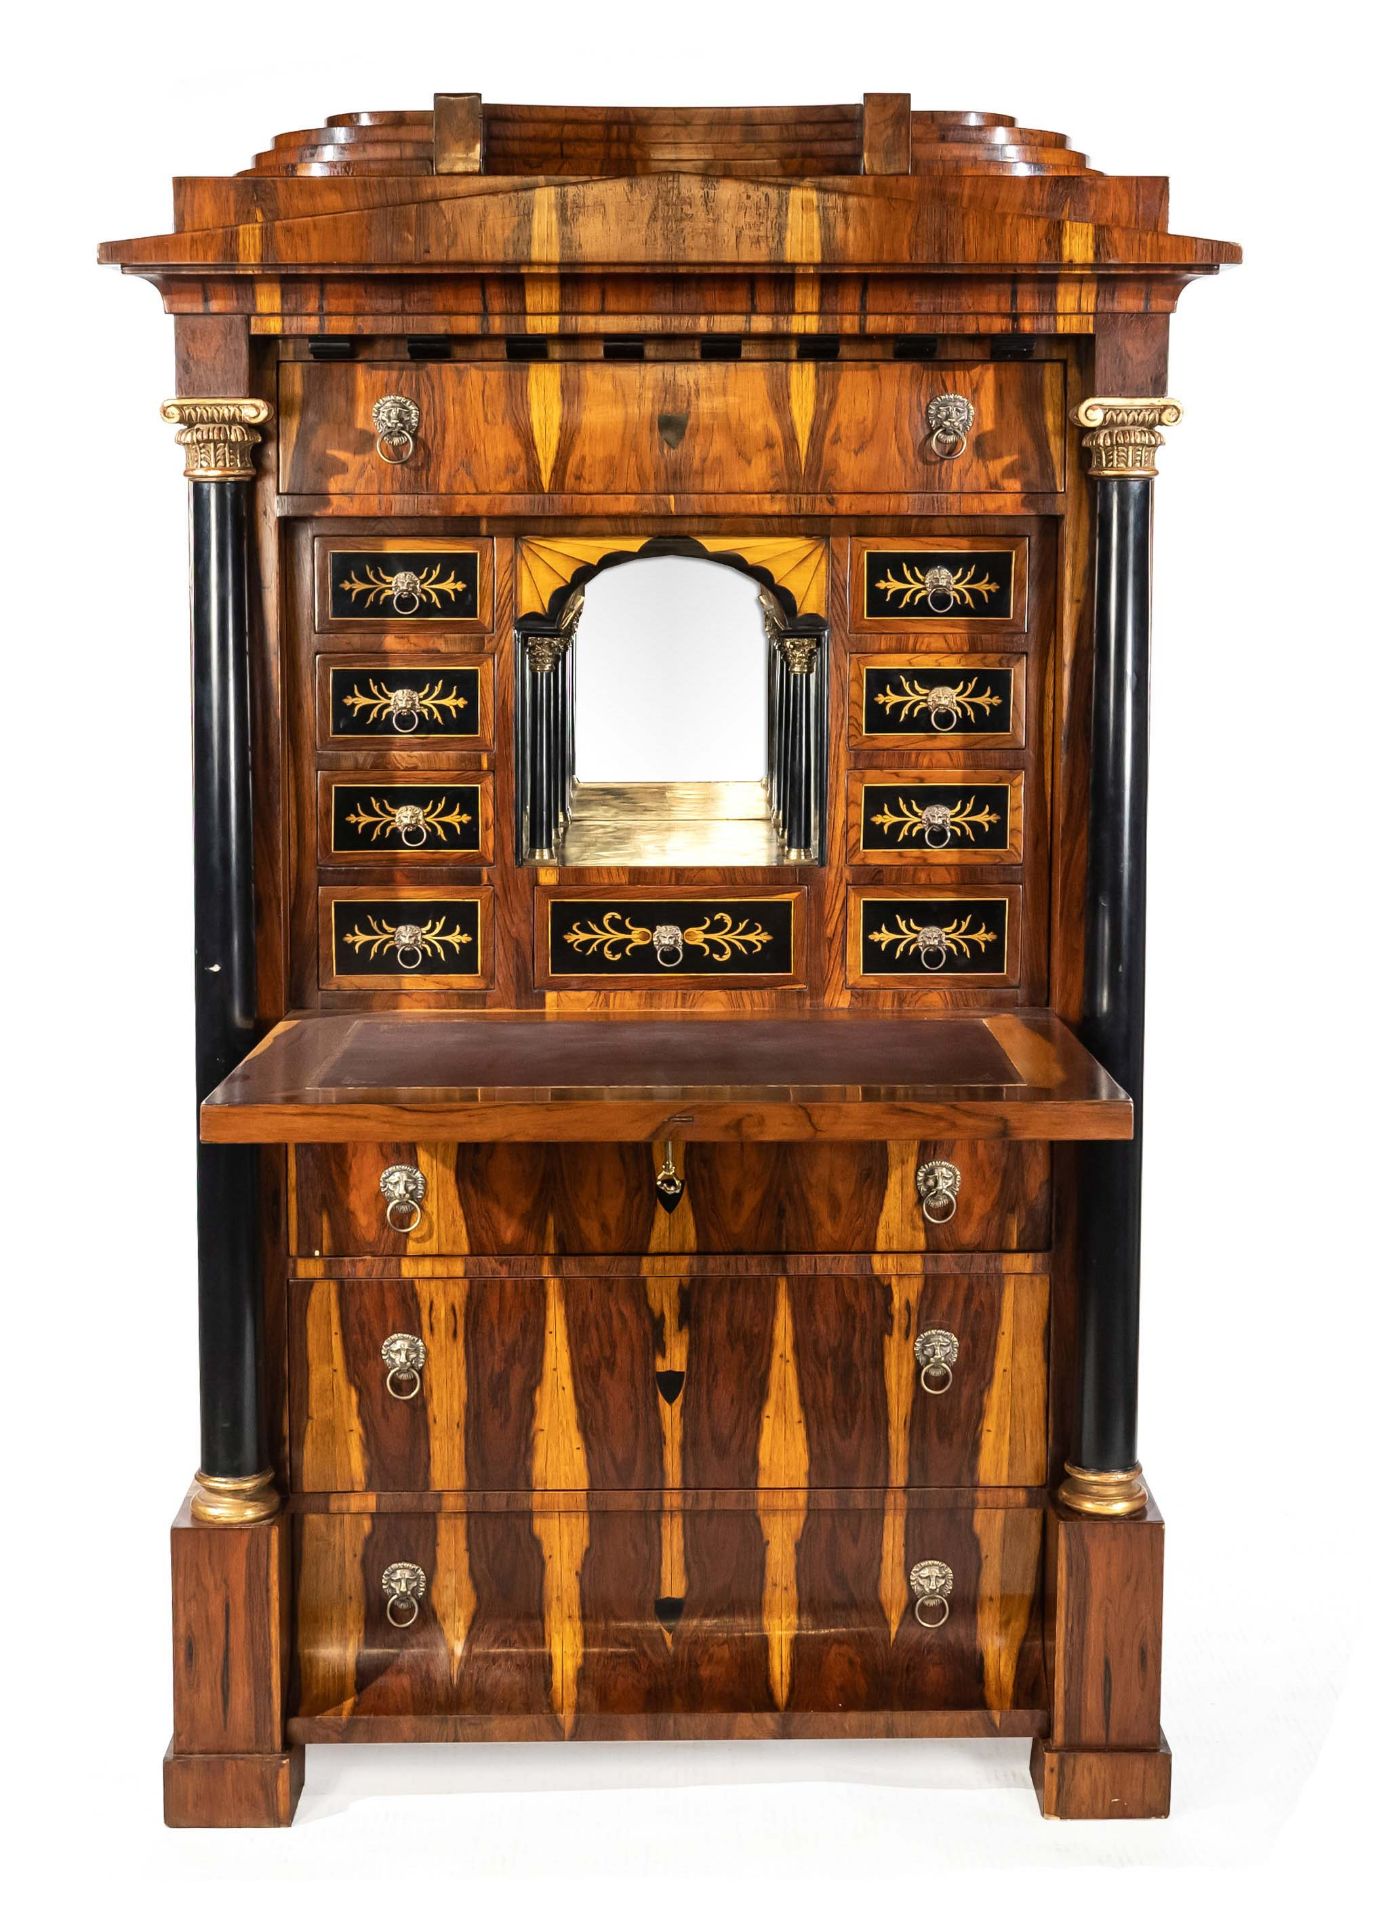 Biedermeier-style standing secretary, 20th century, Indian rosewood and maple partly inlaid, 4-